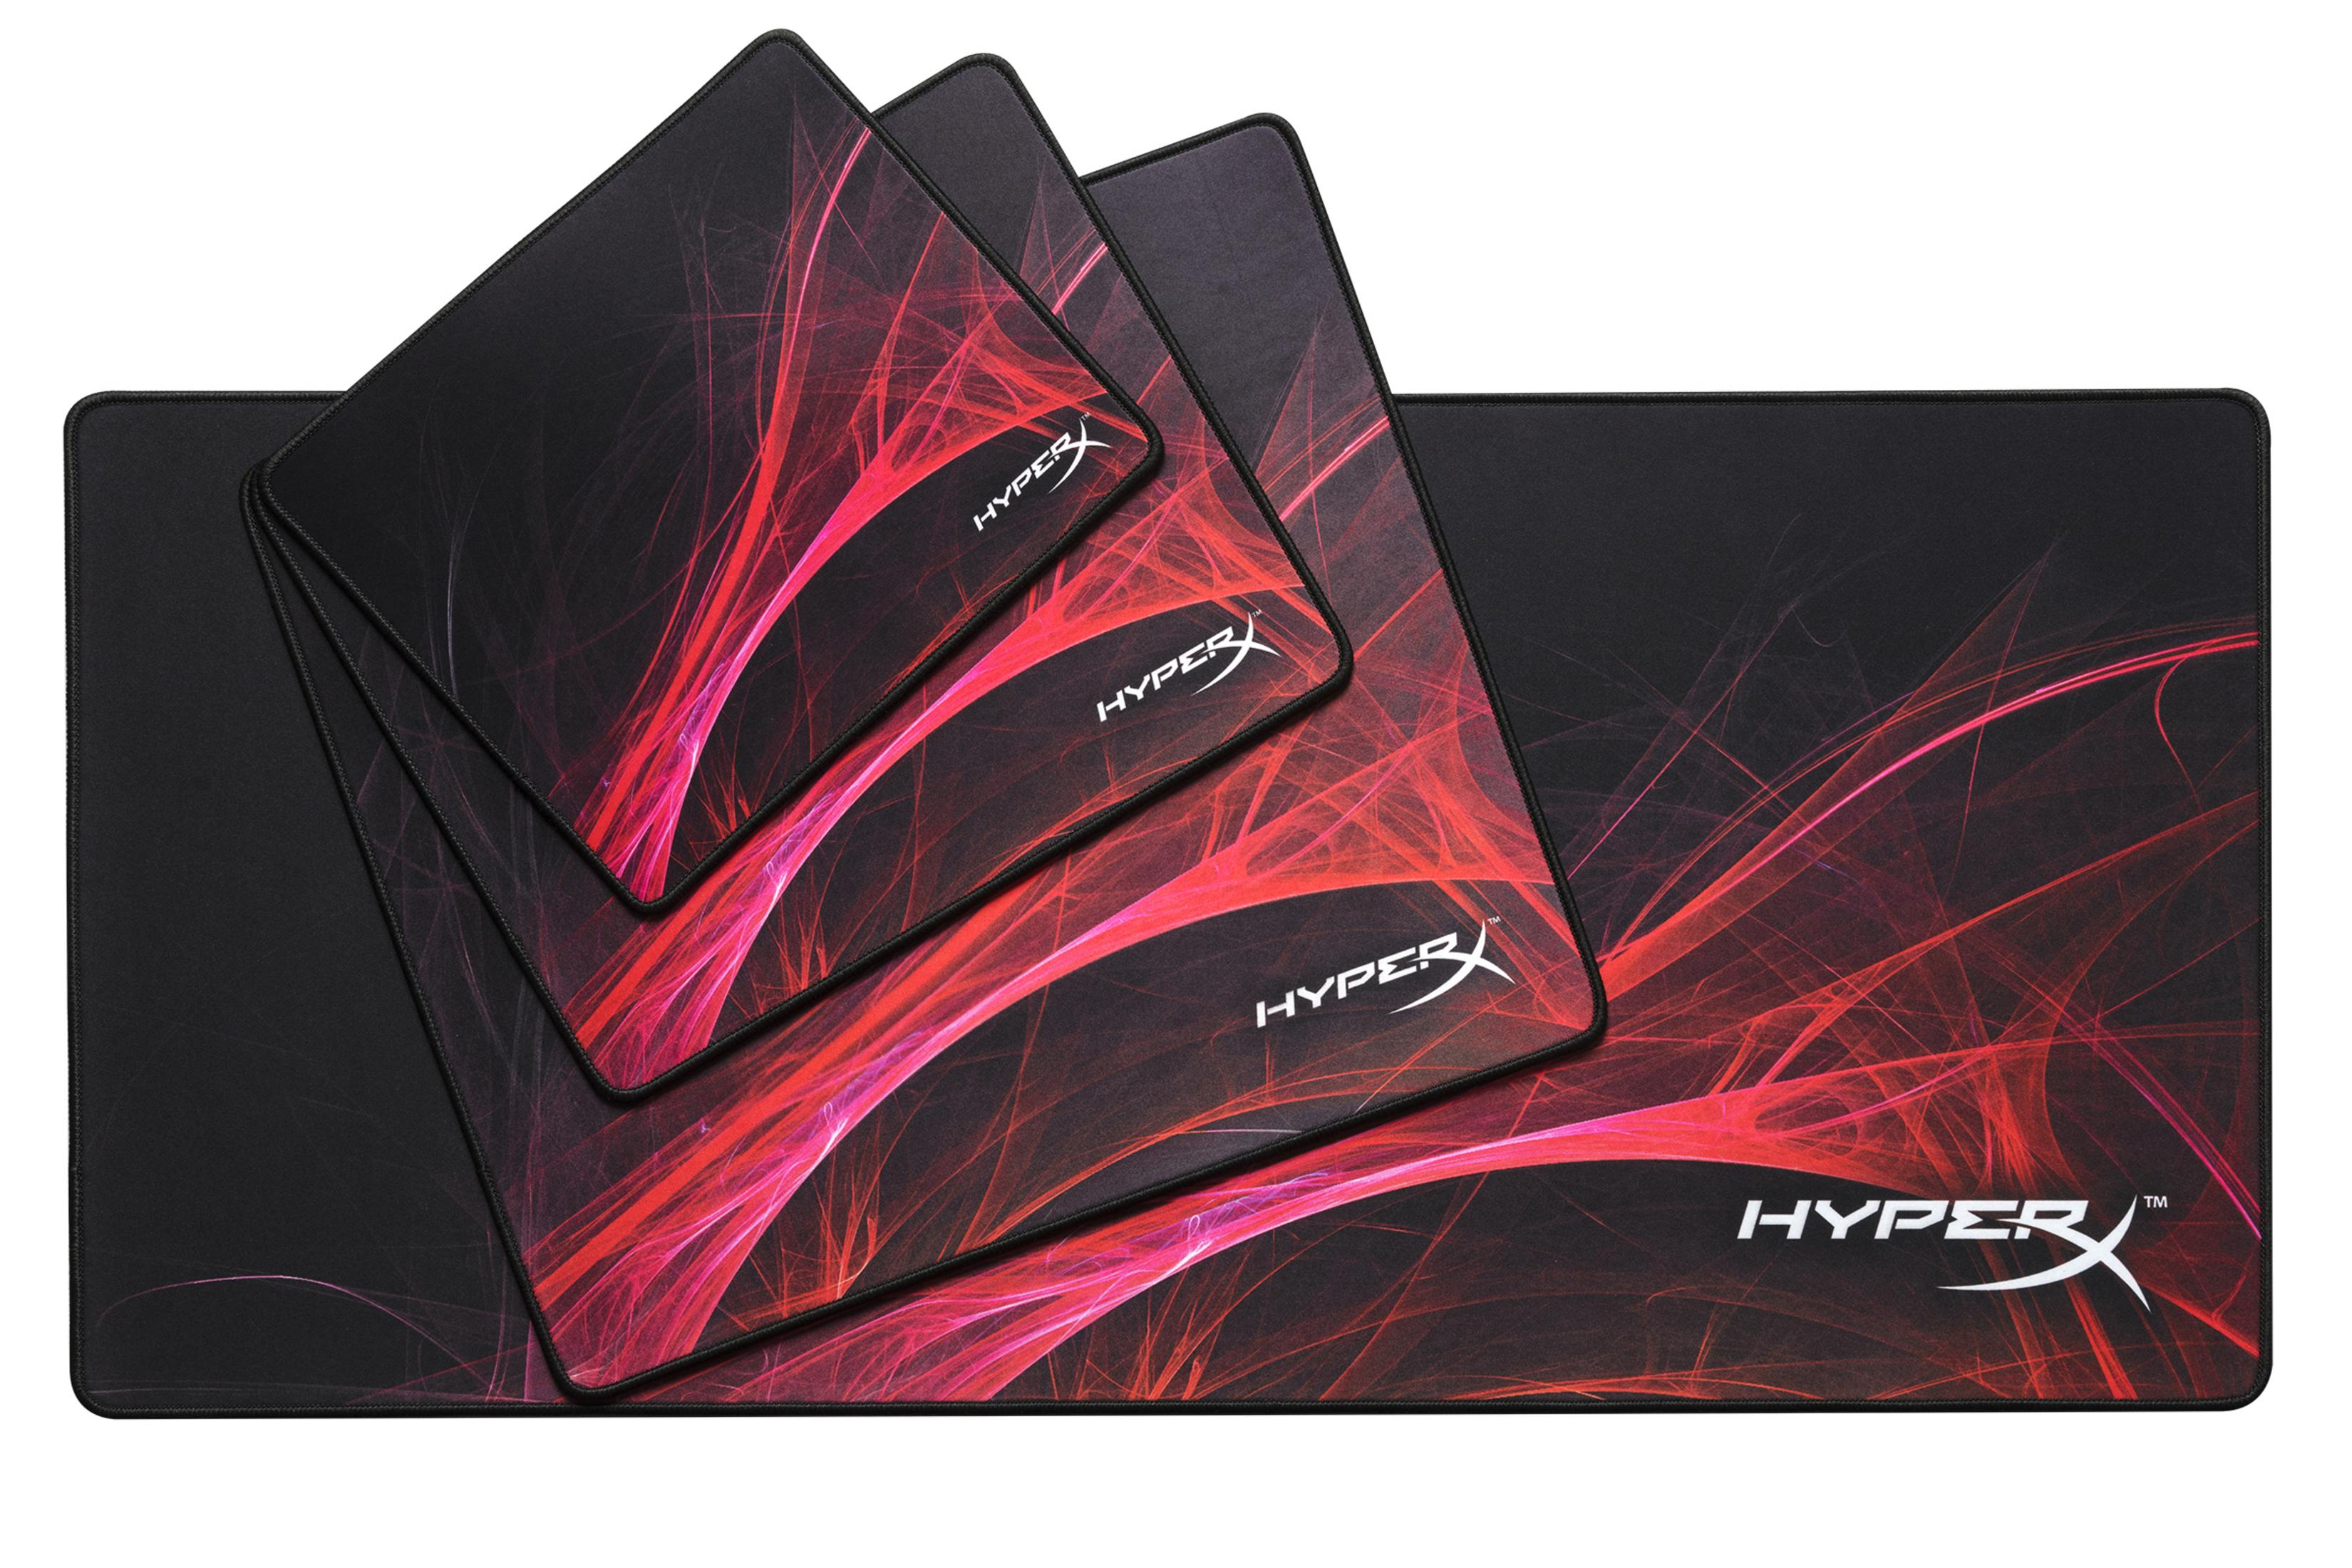 PRO FURY GAMING HYPERX EDITION PAD mm) MOUSE (290 240 Mauspad S SPEED x 4P5Q7AA mm